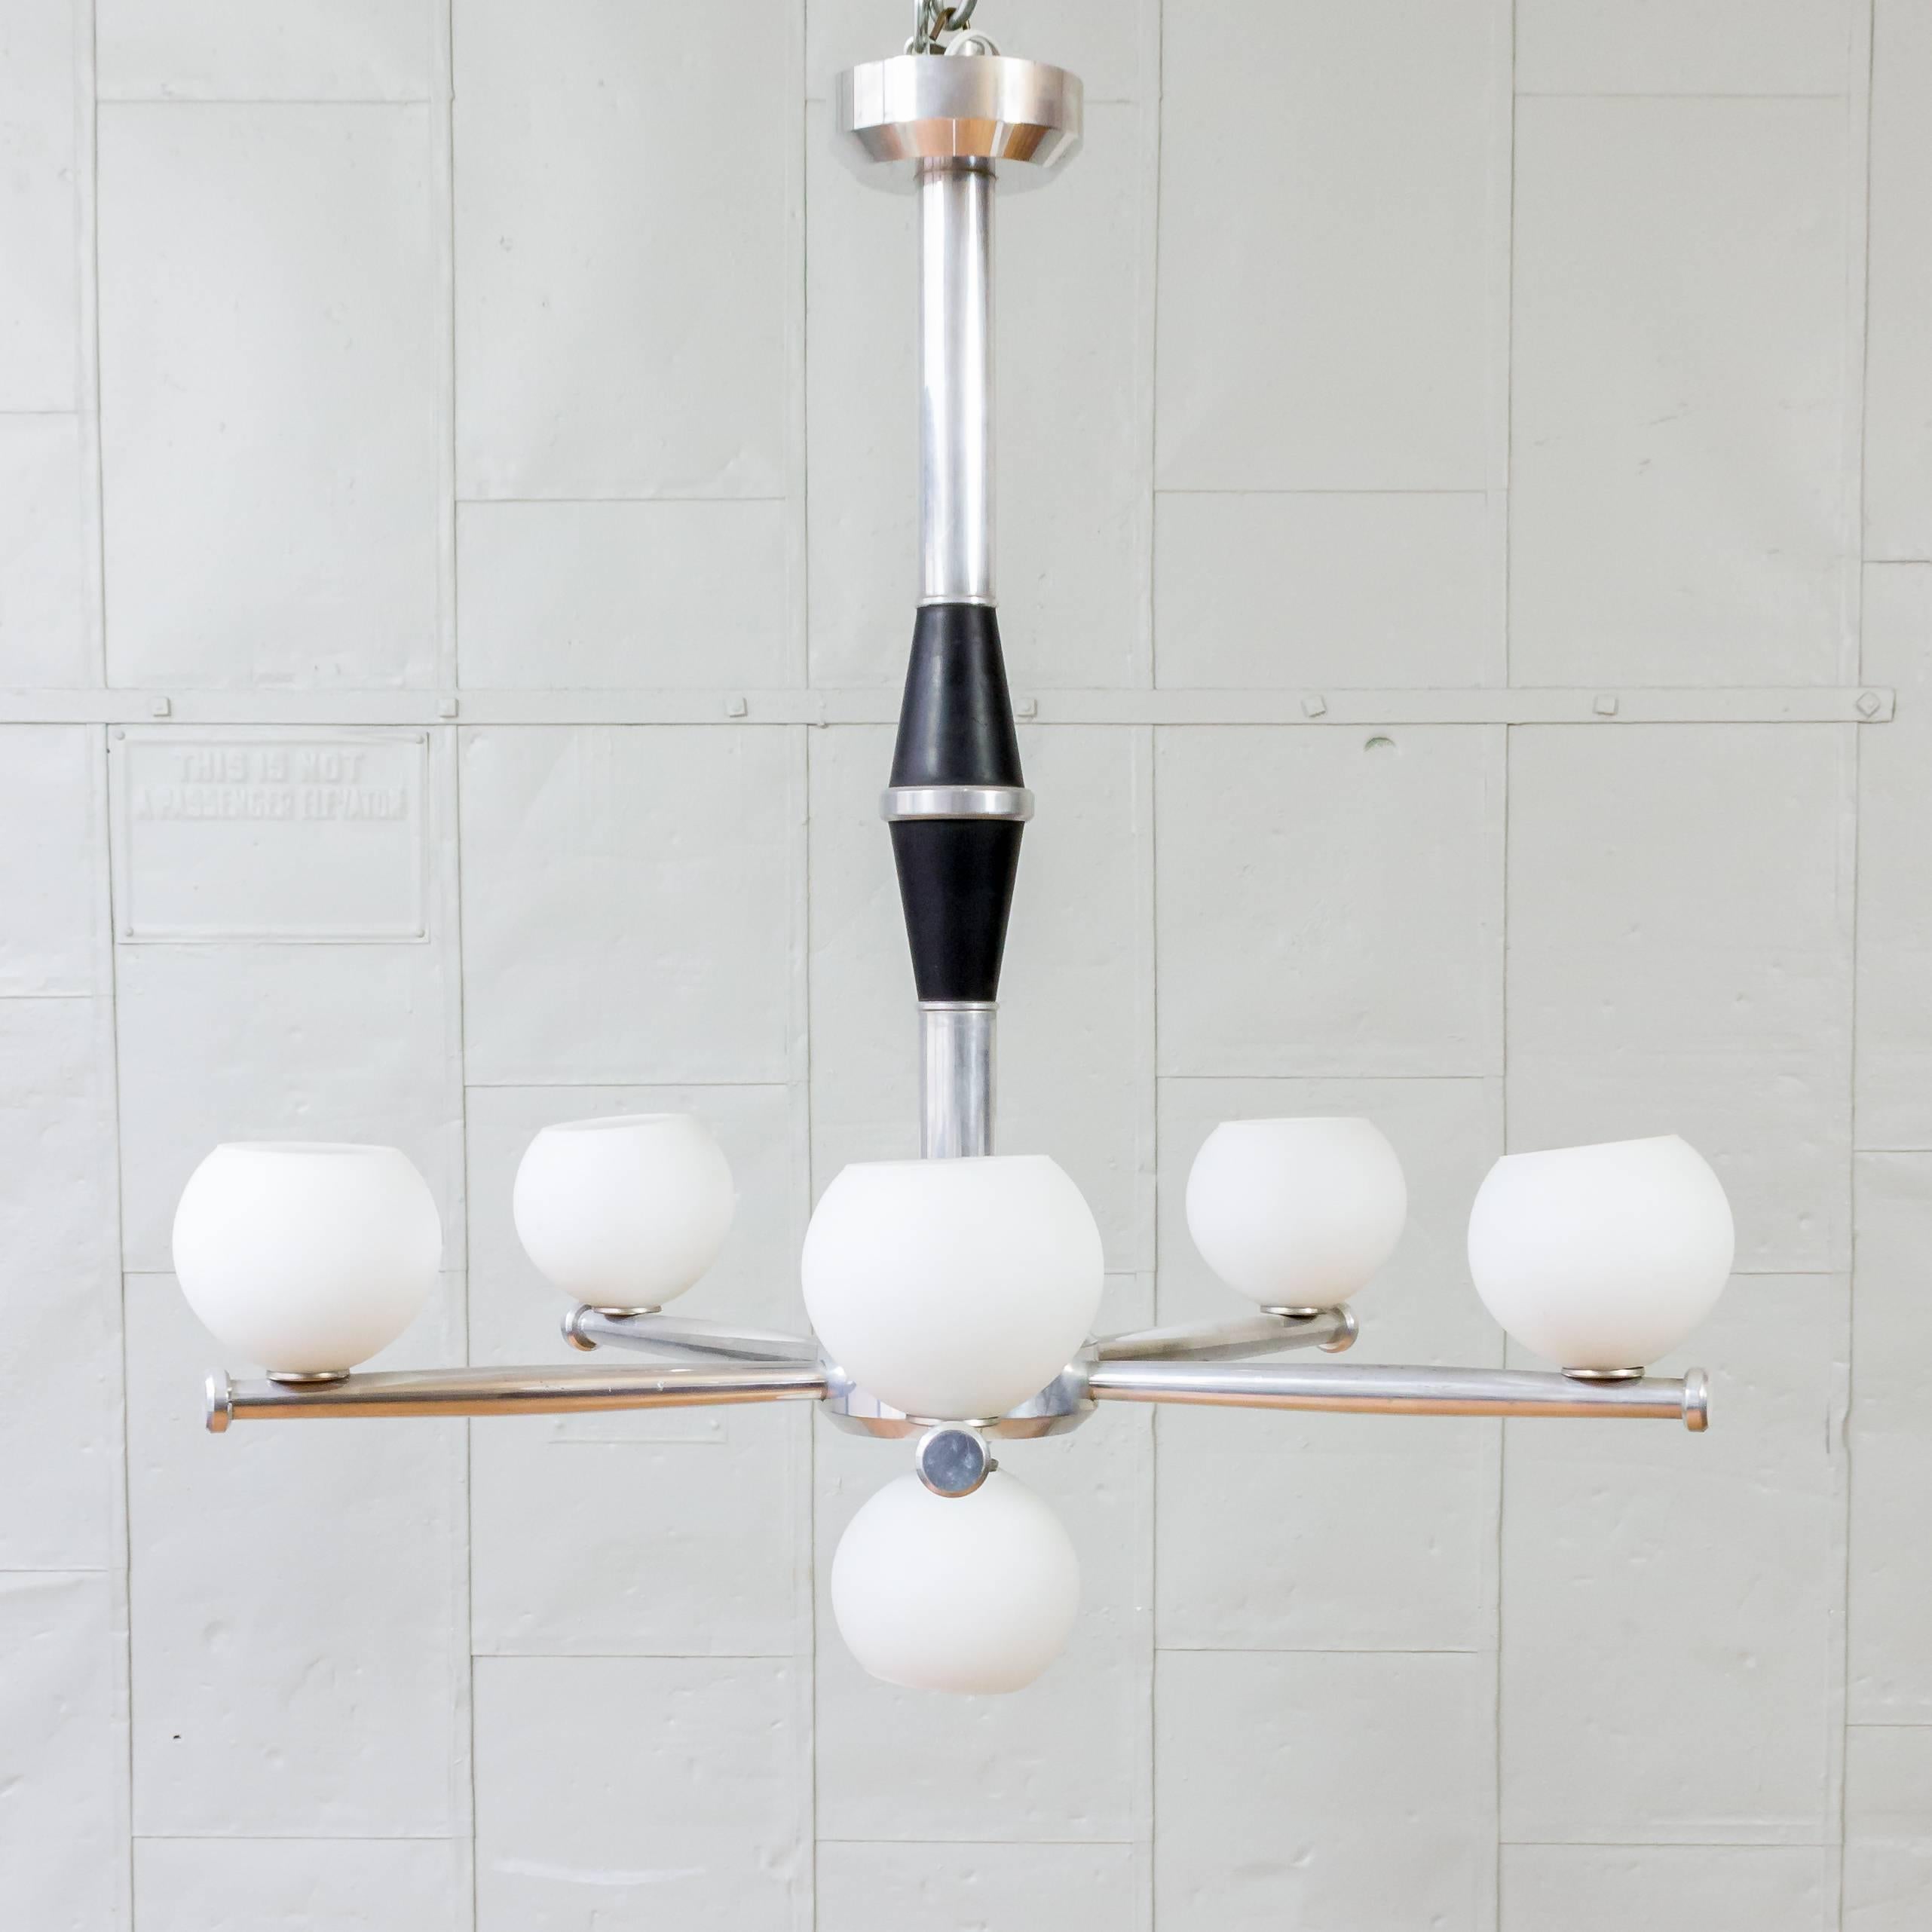 This remarkable French 1950s mid century modern cast aluminum chandelier features six frosted glass globes. This stunning piece is in very good vintage condition and has recently been rewired, ensuring both functionality and safety. Standing at an